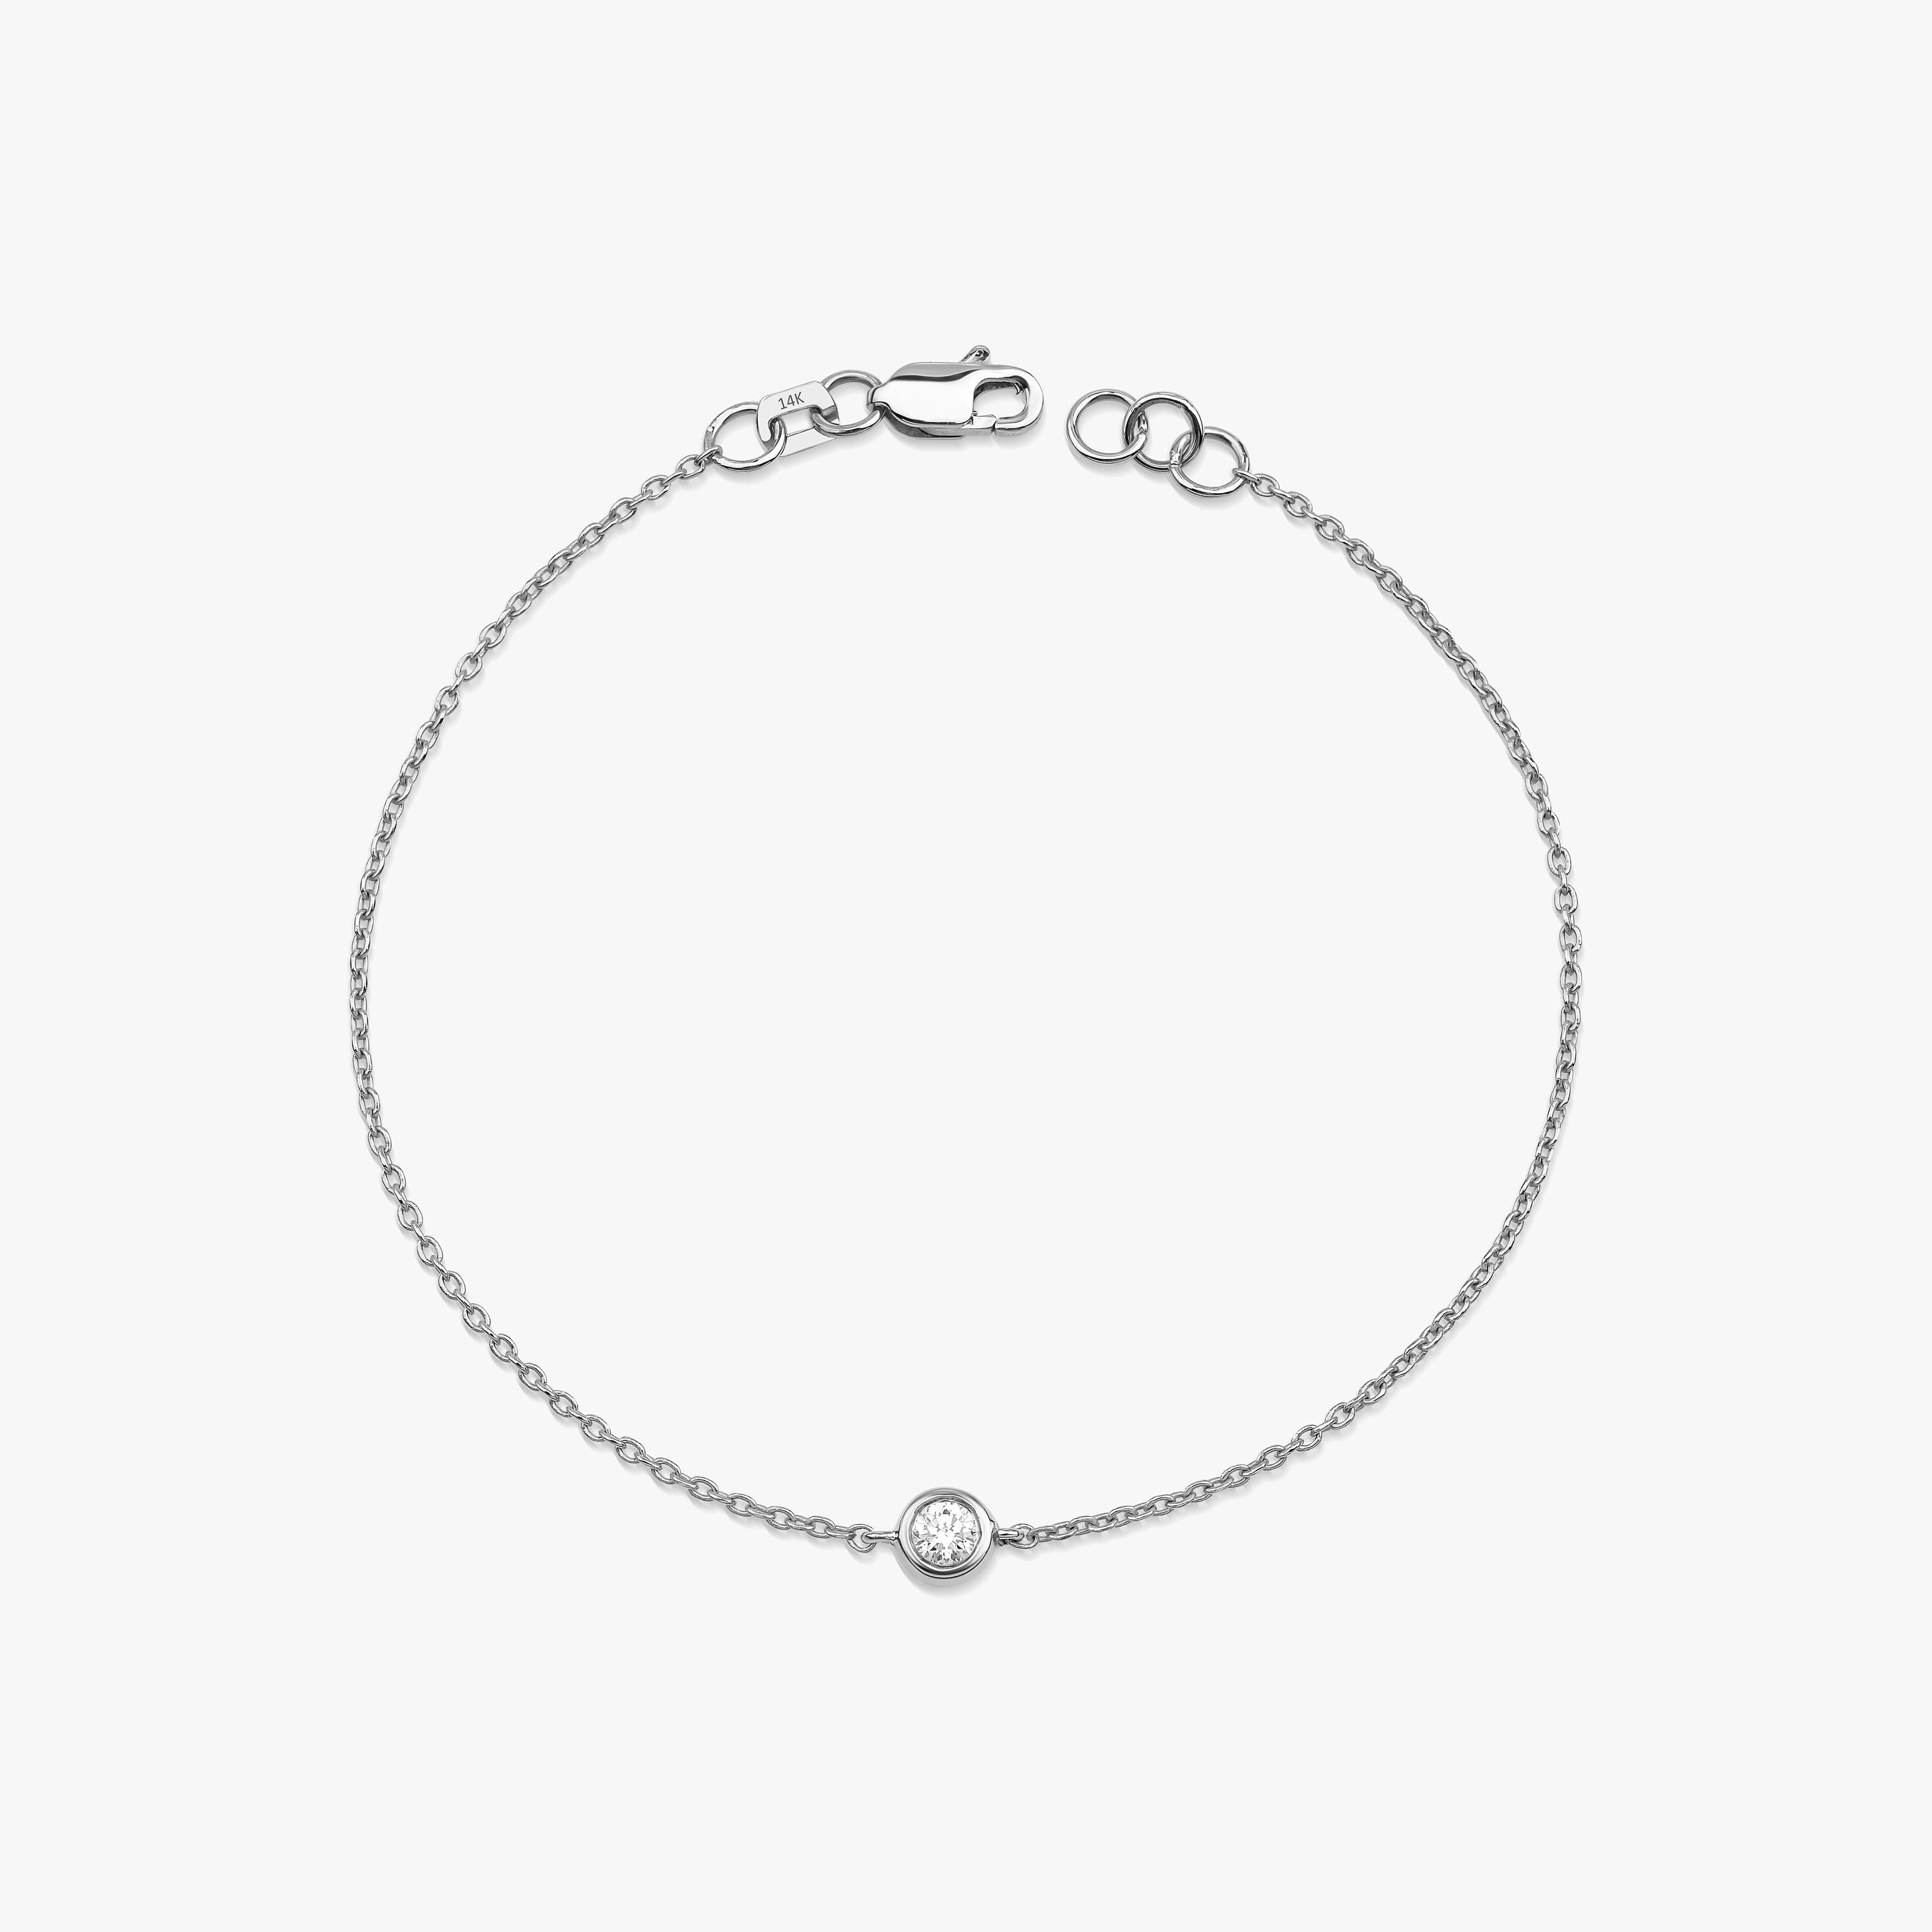 Diamond Solitaire Bracelet Available in 14K and 18K Gold